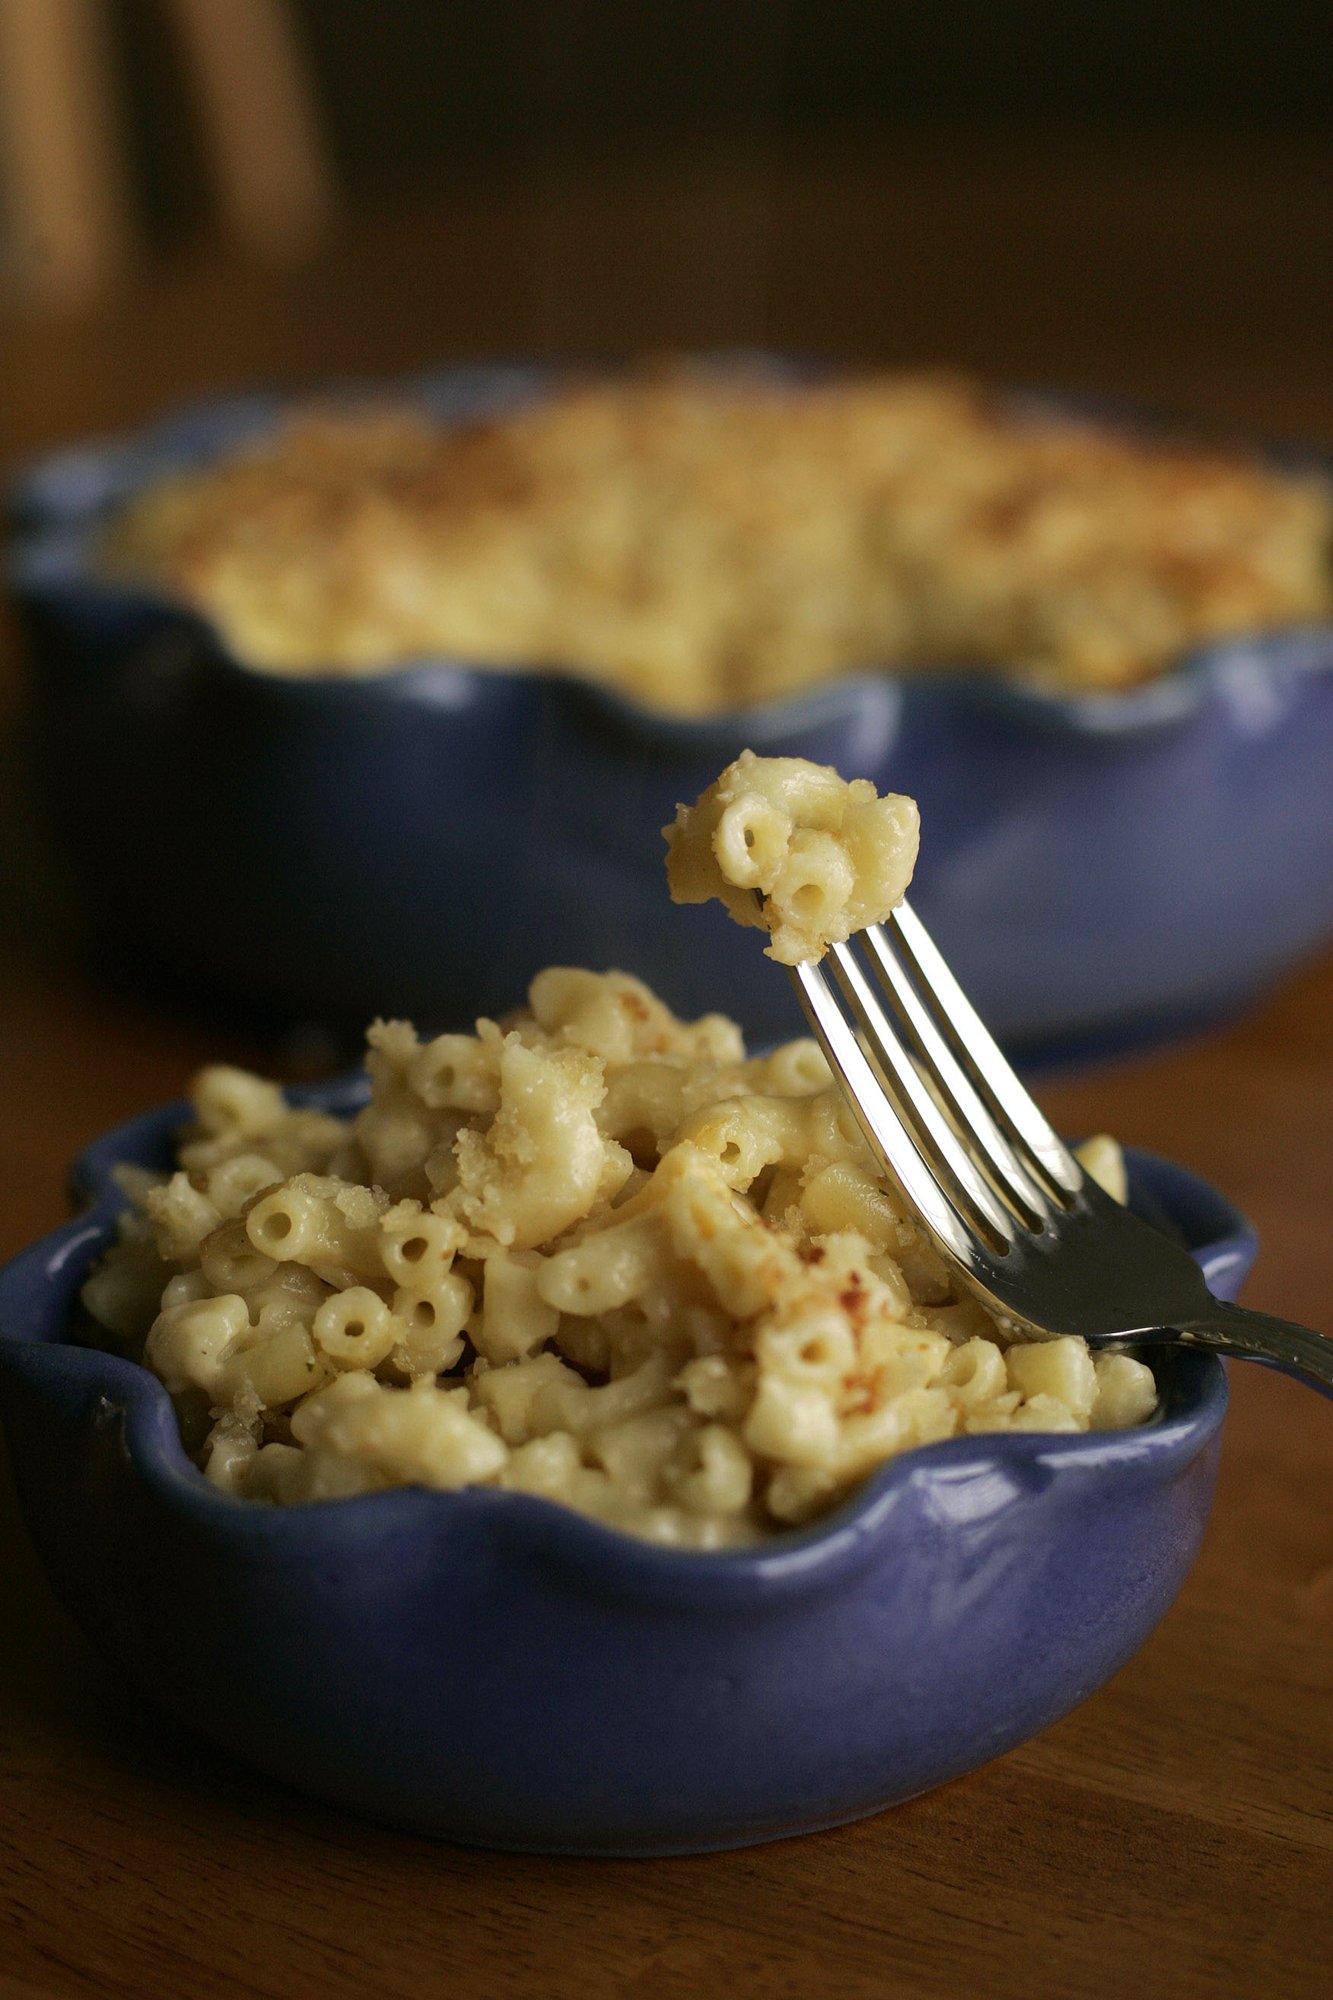 A &quot;Mac 'n' Cheese Explosion&quot; potluck at 5:30 p.m. Feb. 19 with the families sheltered by the Winter Hospitality Overflow project at St. Andrew Lutheran Church, 5607 N.E. Gher Road, Vancouver, will launch a sundown-to-sundown fast.